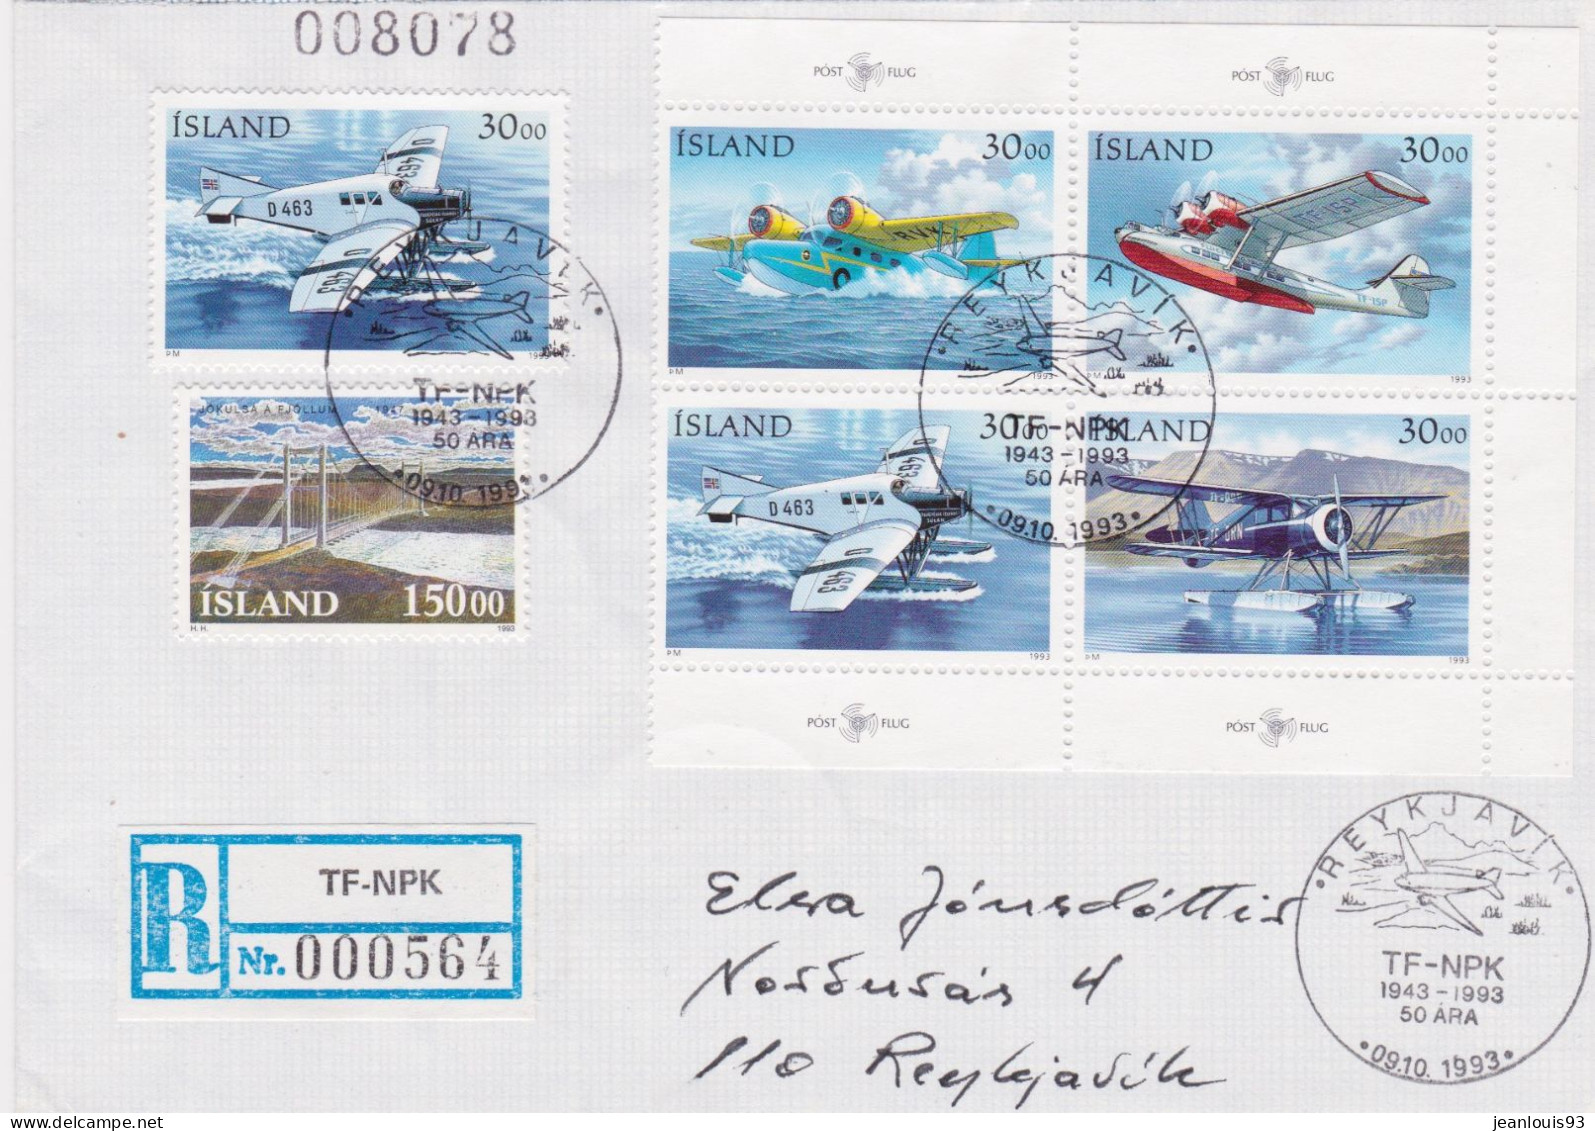 ISLANDE - BELLE LETTRE RECOMMANDEE TIMBRES AVION 1993 - Airmail